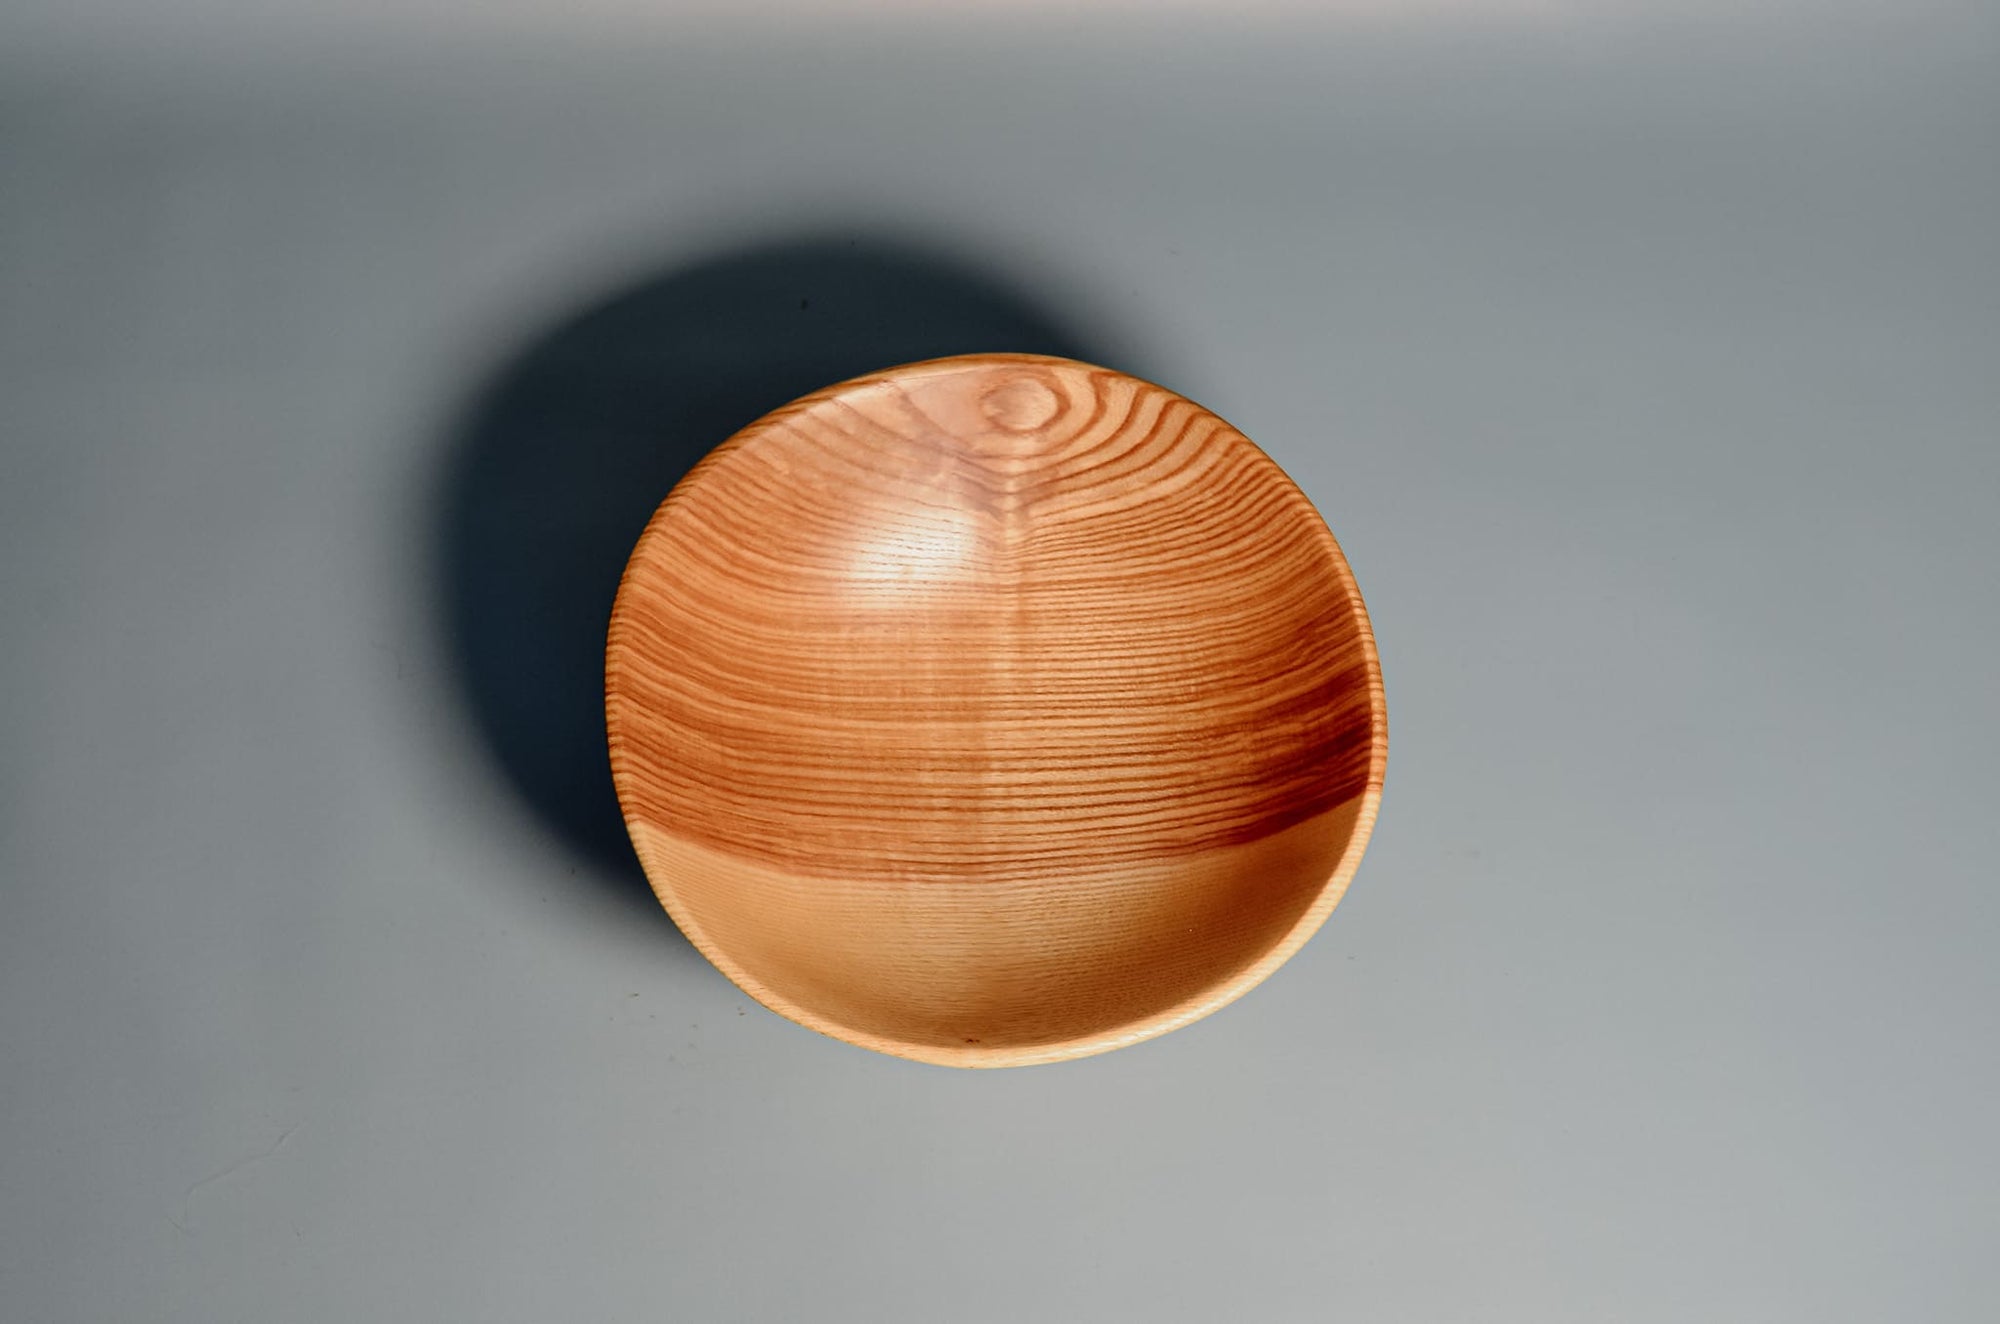 AestheticAccent™ Wild Ash Round Wooden Plate